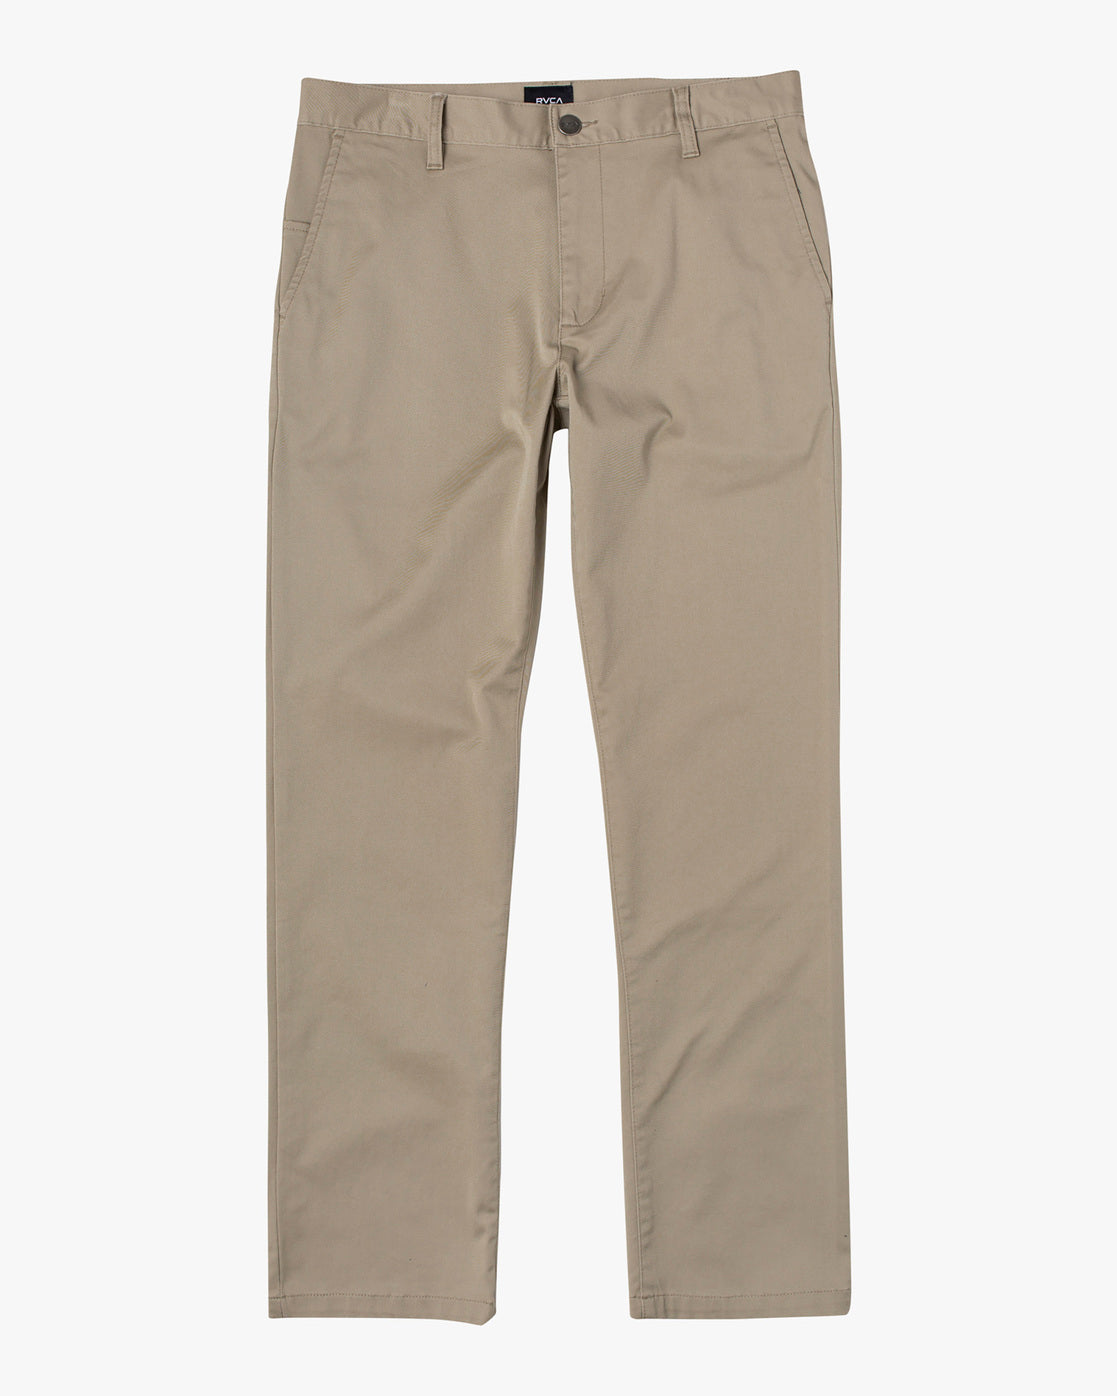 The Weekend Stretch Straight Fit Pants - Khaki